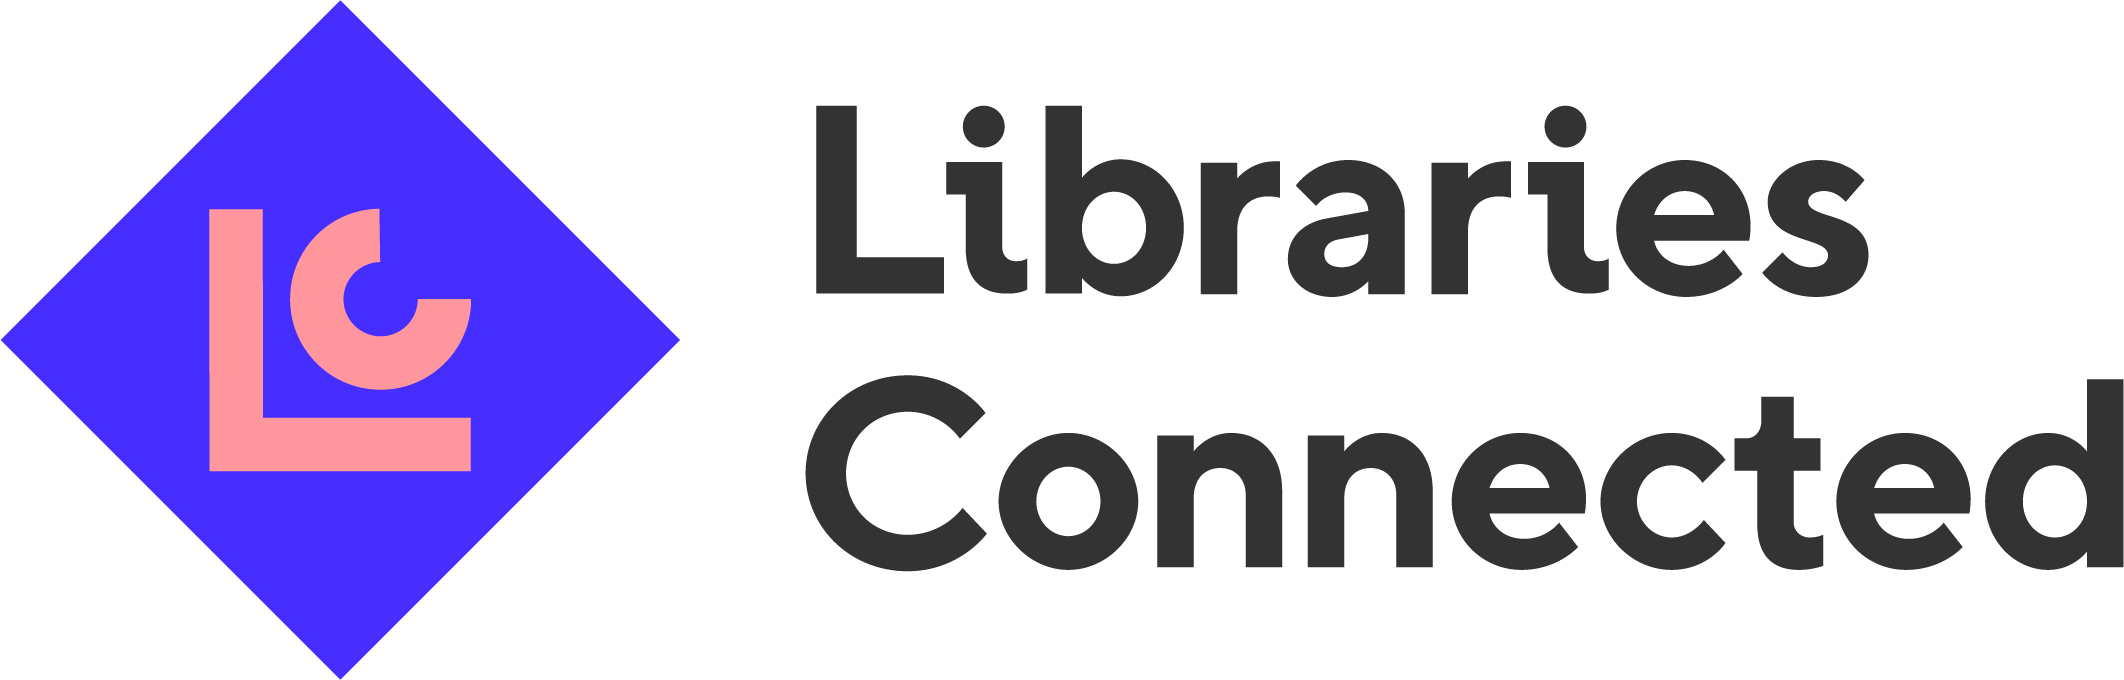 banner for Libraries Connected with letters LC in mauve on a purple background